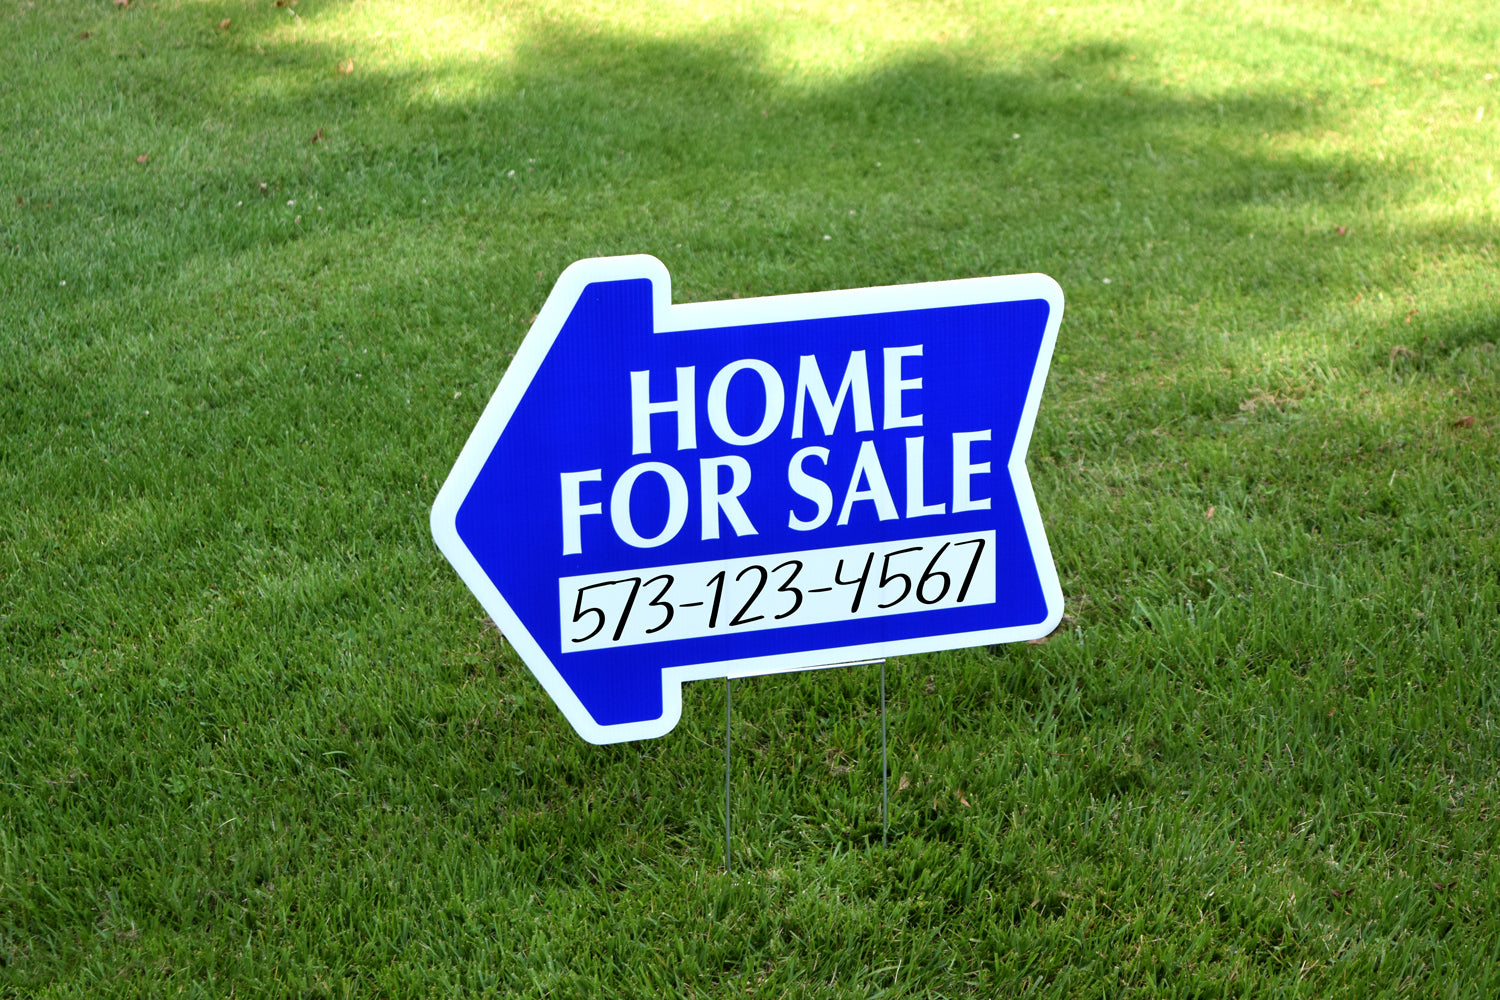 REAL ESTATE SUPPLIES HOME FOR SALE SIGN